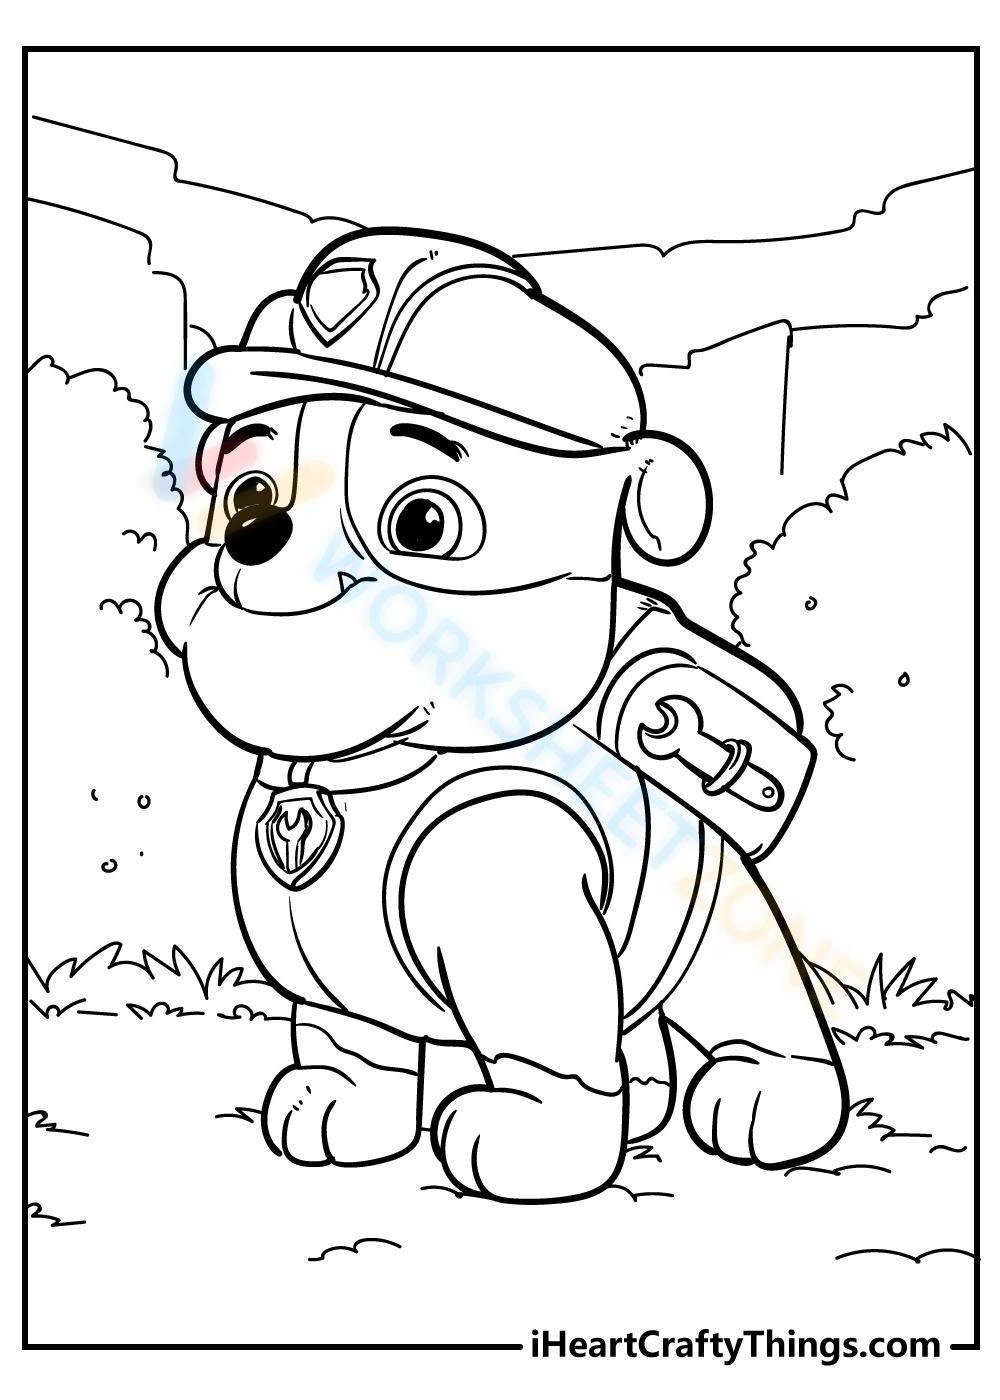 Our collection of free paw patrol coloring pages for kids